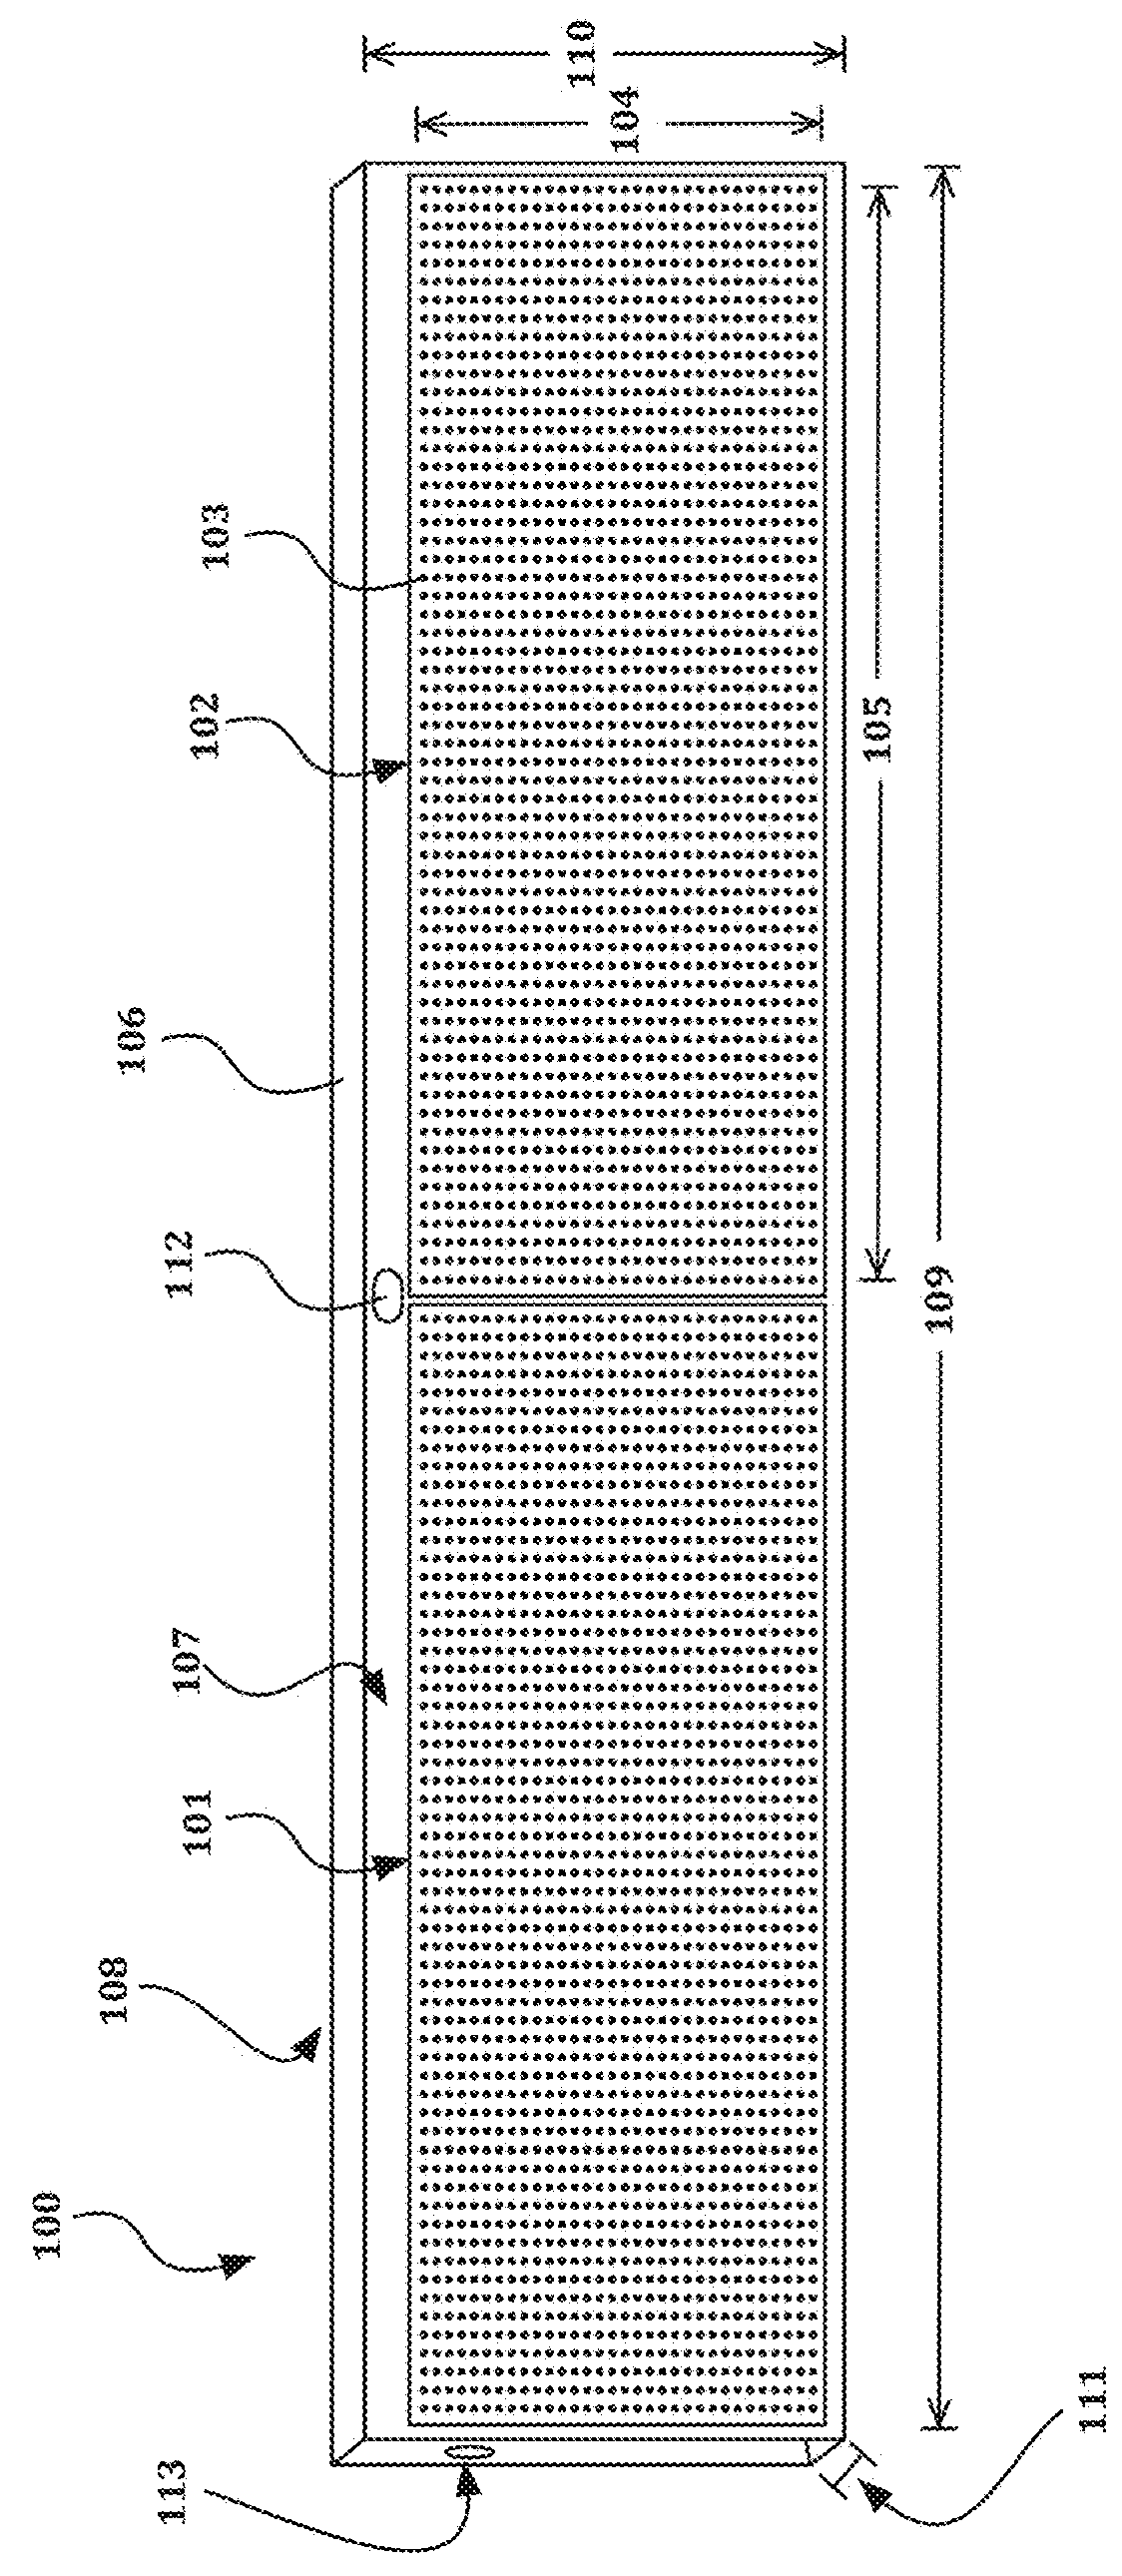 Merchandising communication and stock-out condition monitoring system